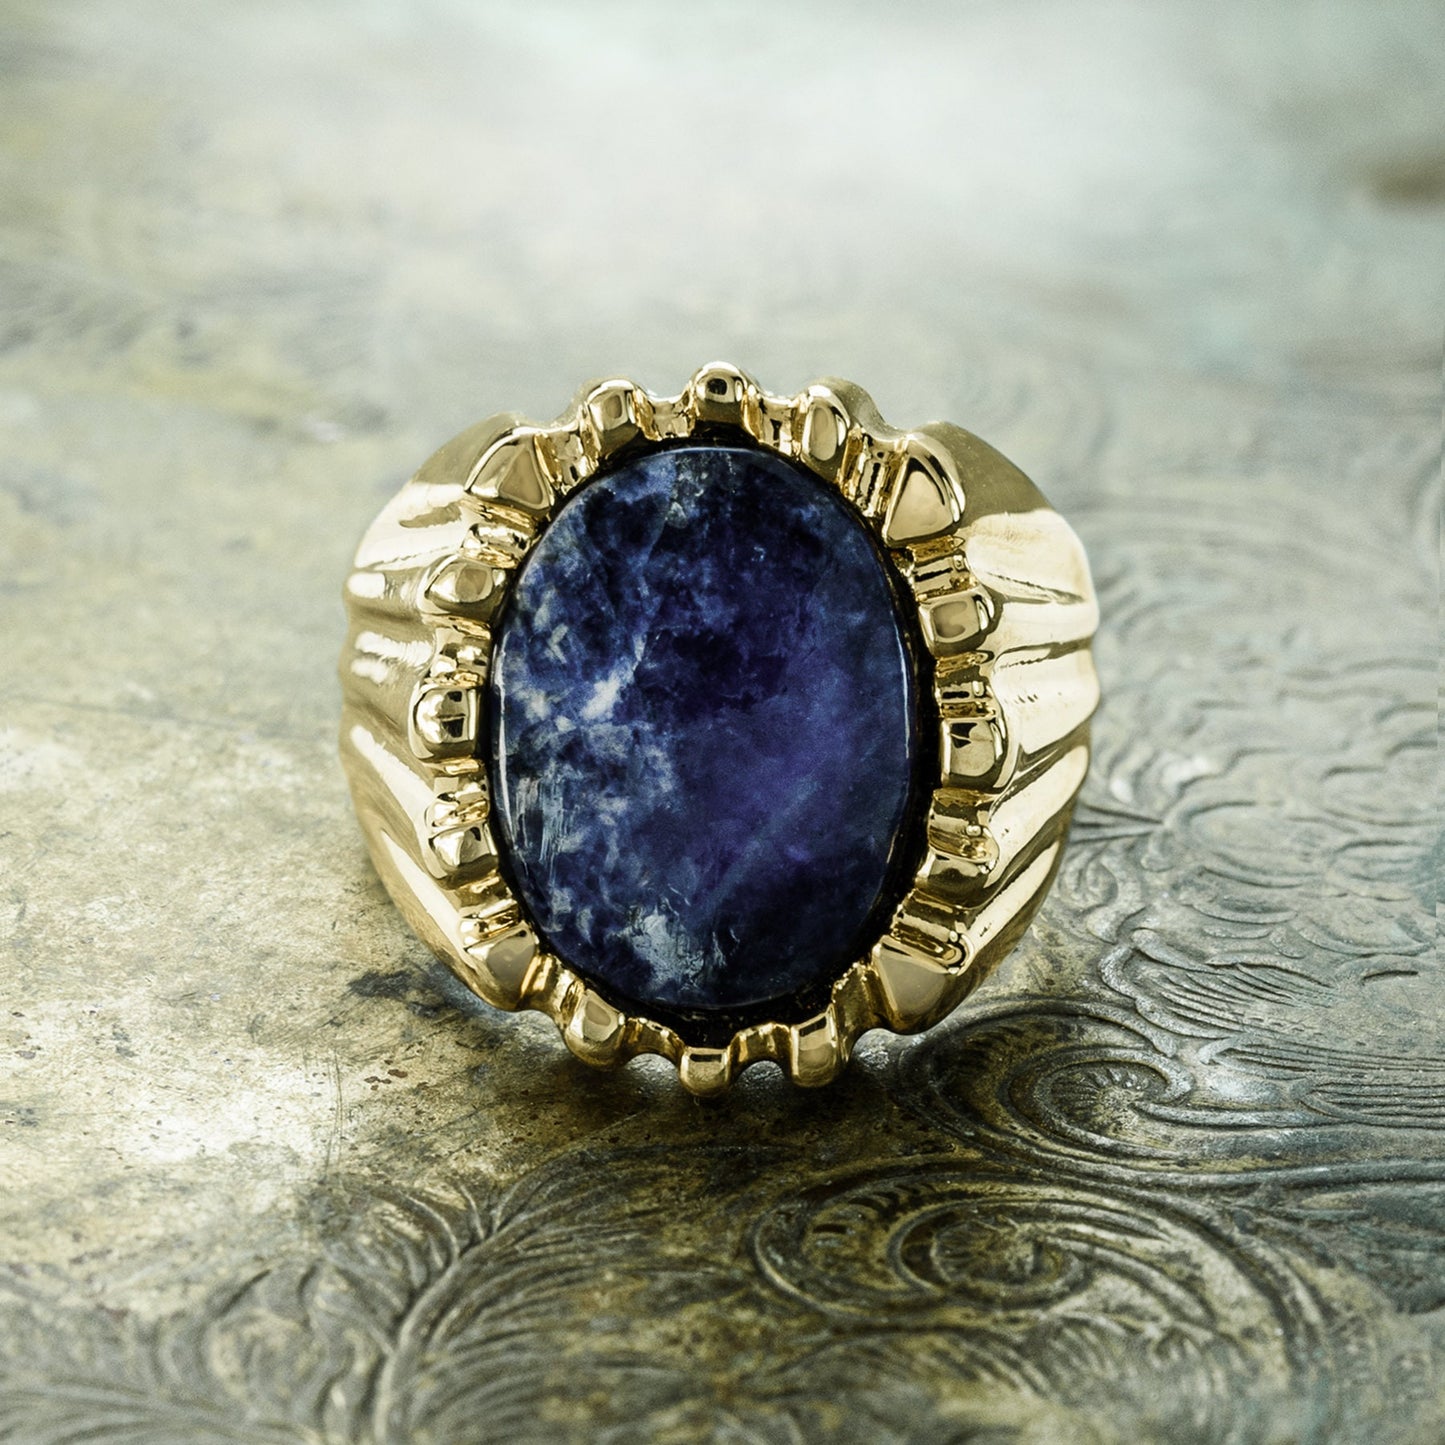 Vintage Ring 1980s Mens Genuine Sodalite 18kt Gold Plated Ring Unisex Jewelry #R1960